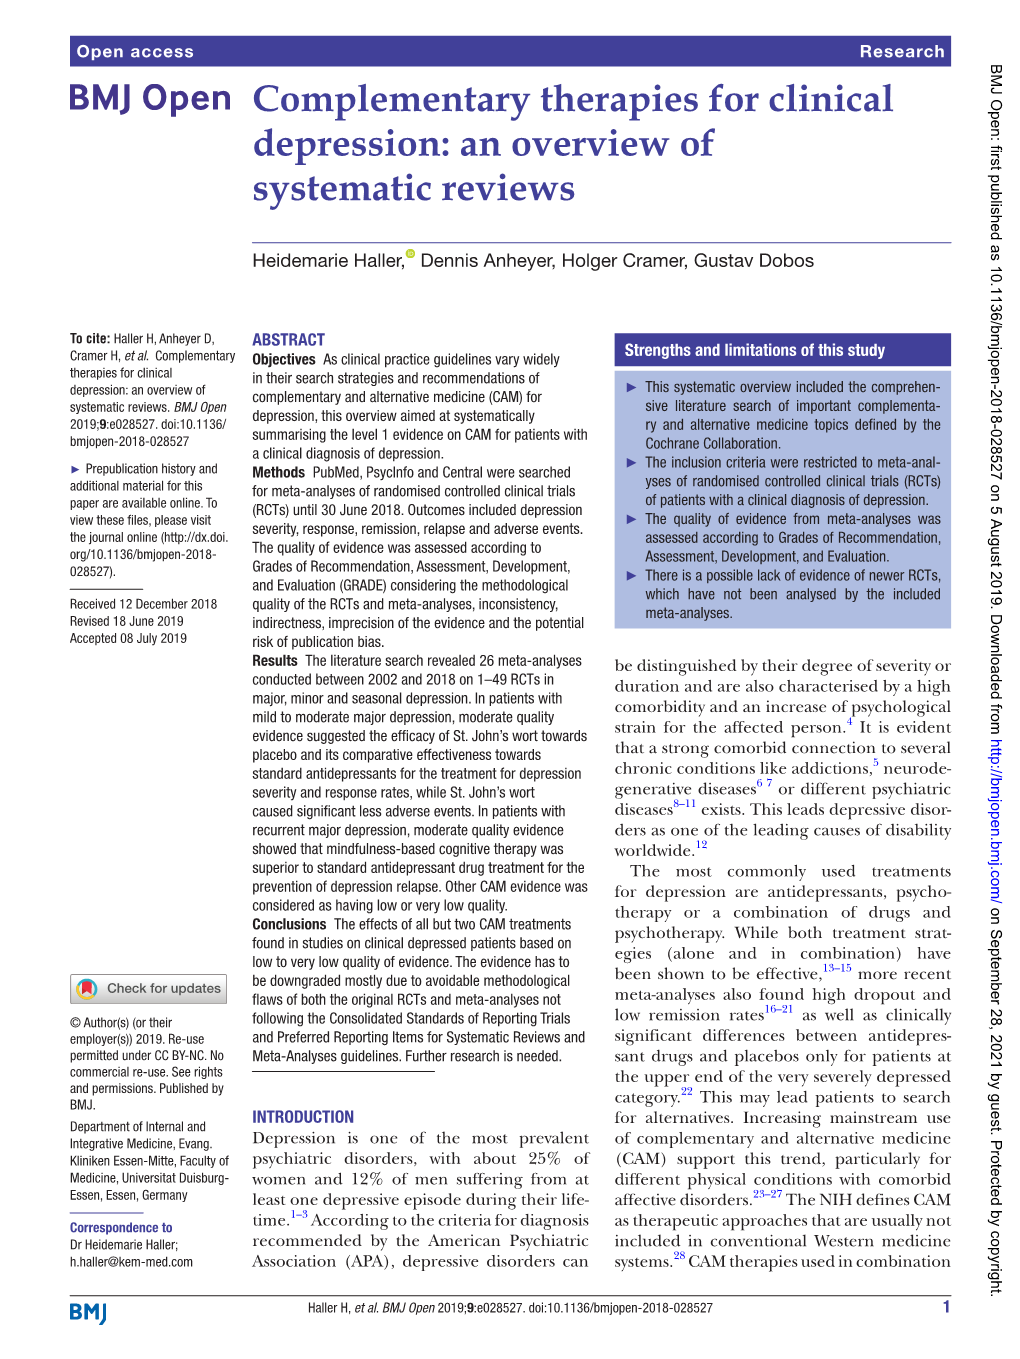 Complementary Therapies for Clinical Depression: an Overview of Systematic Reviews